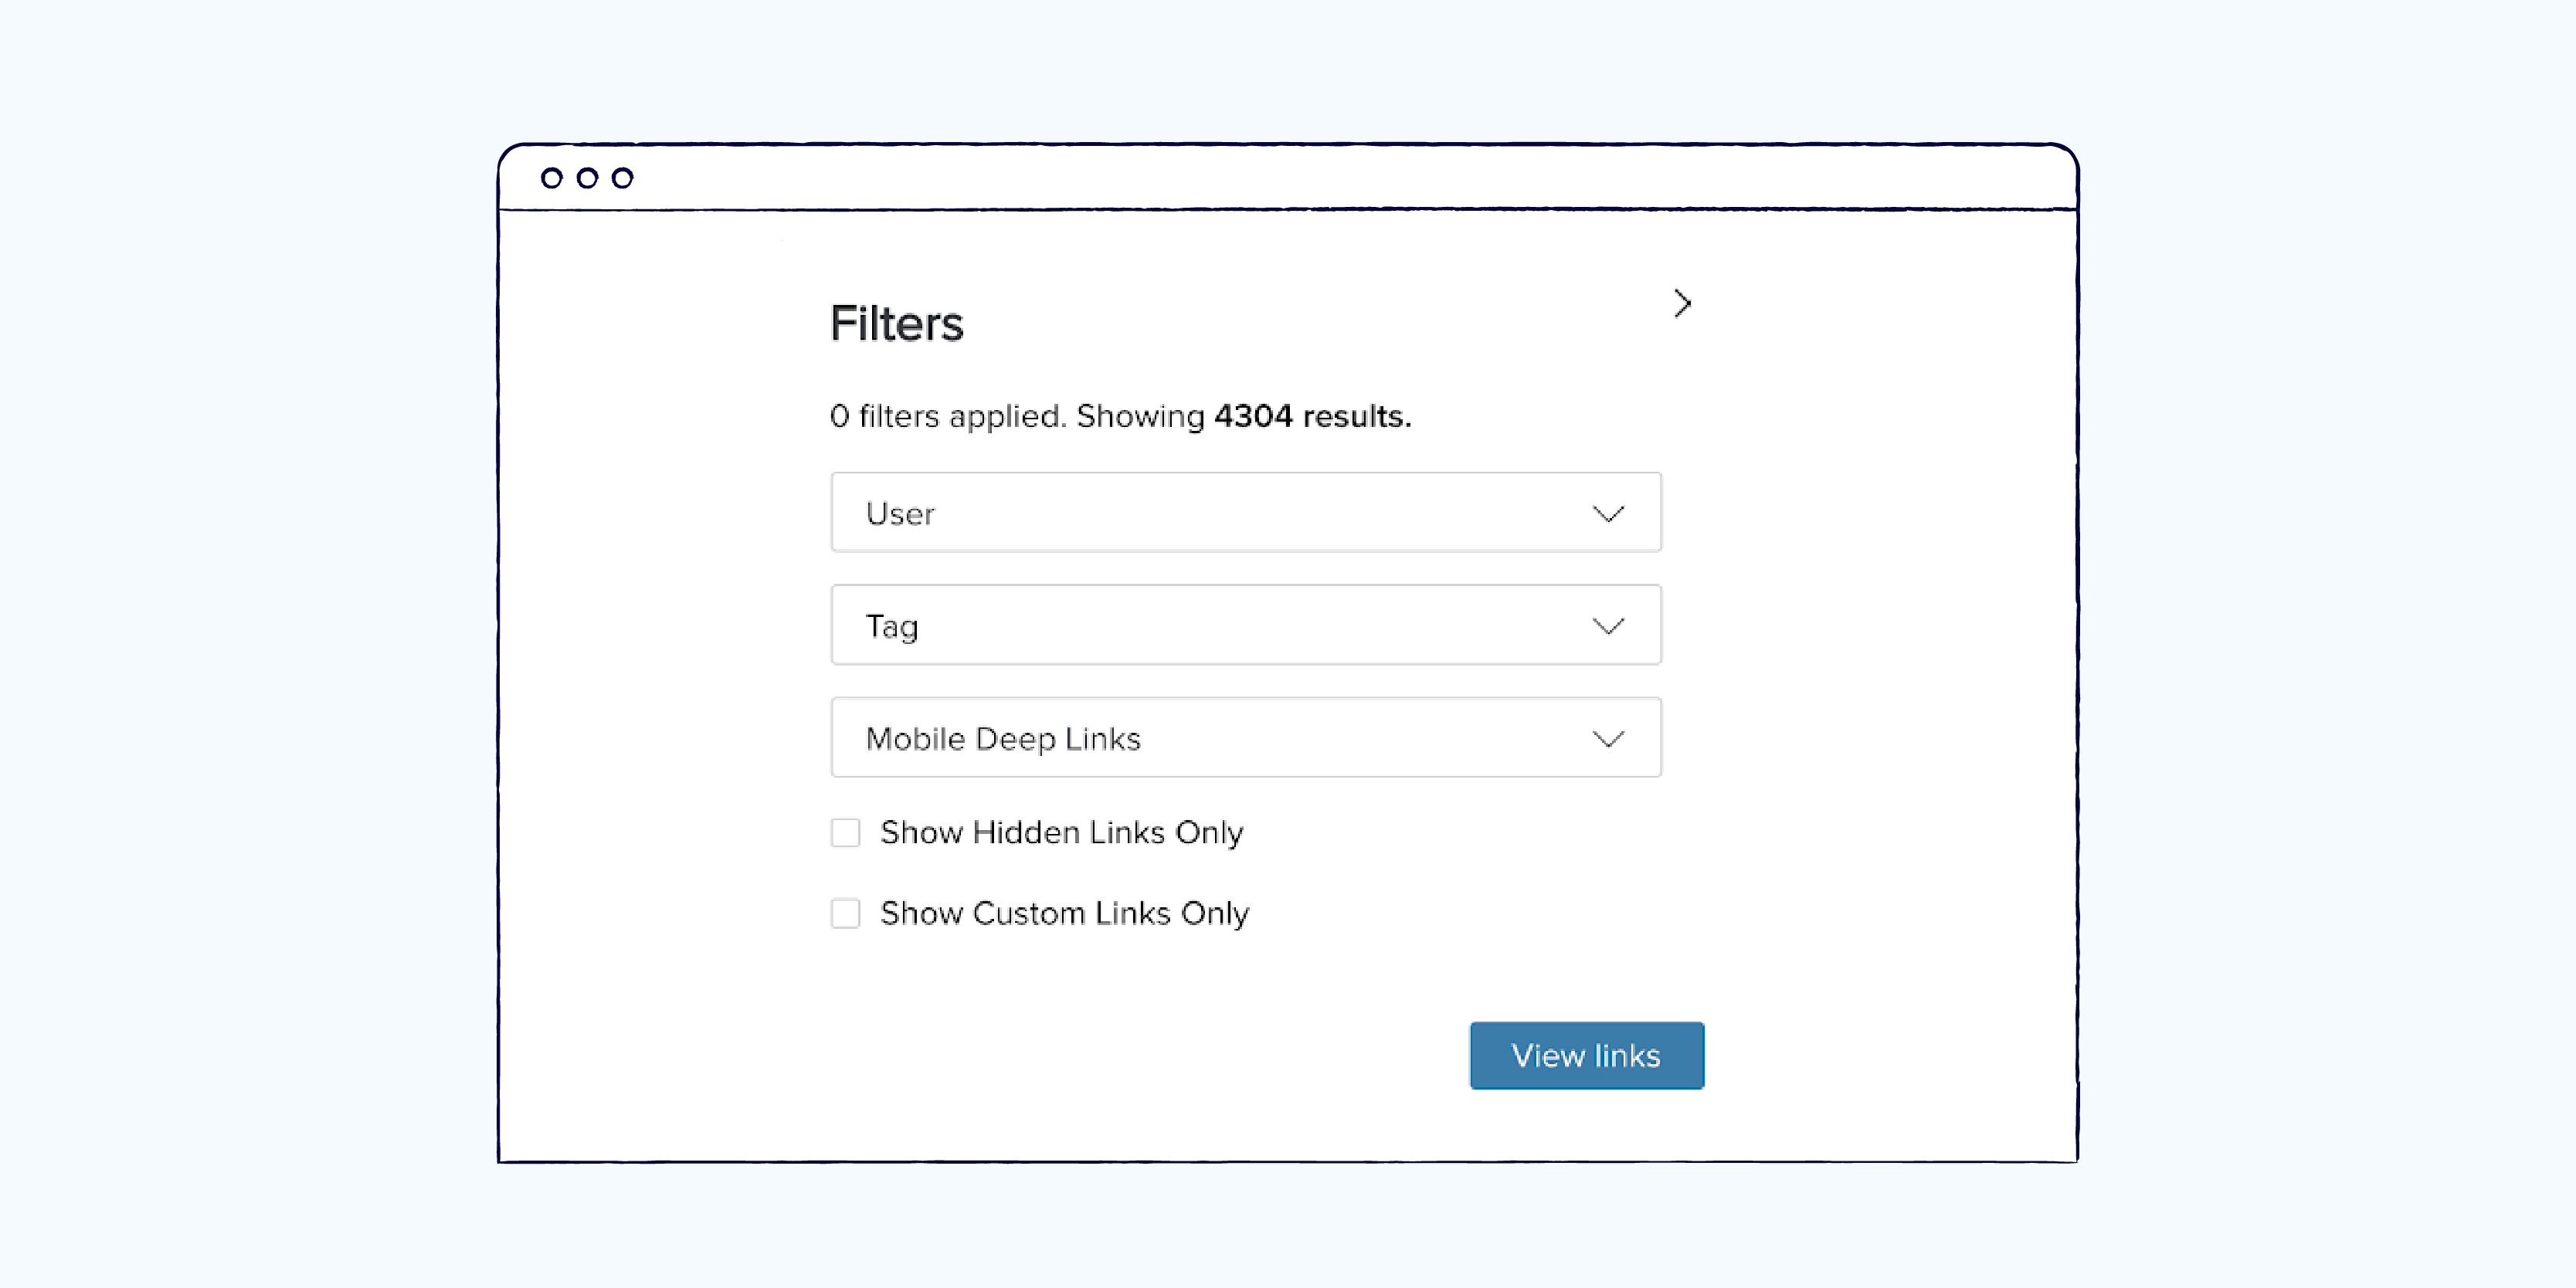 Clean filtering options interface on web app or mobile device